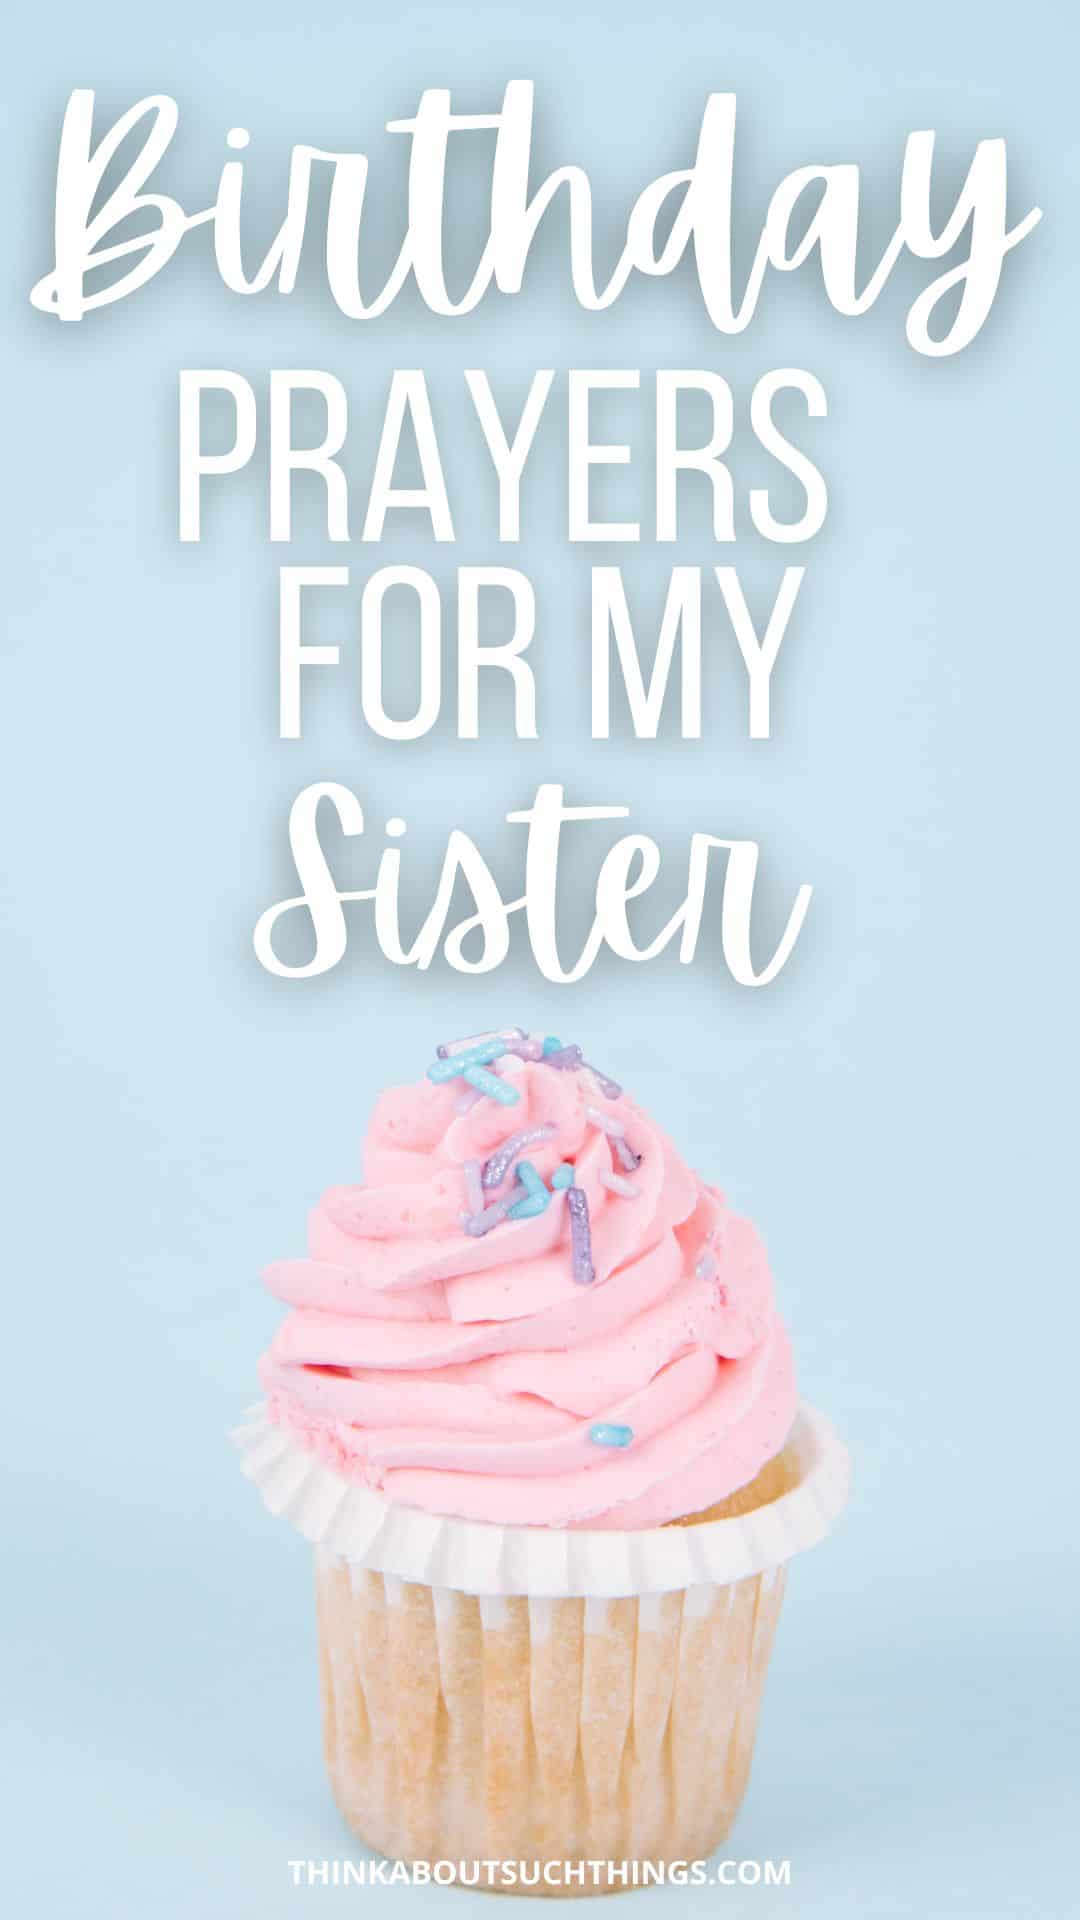 Wonderful Birthday Prayers For Sister Plus Images Think About Such Things